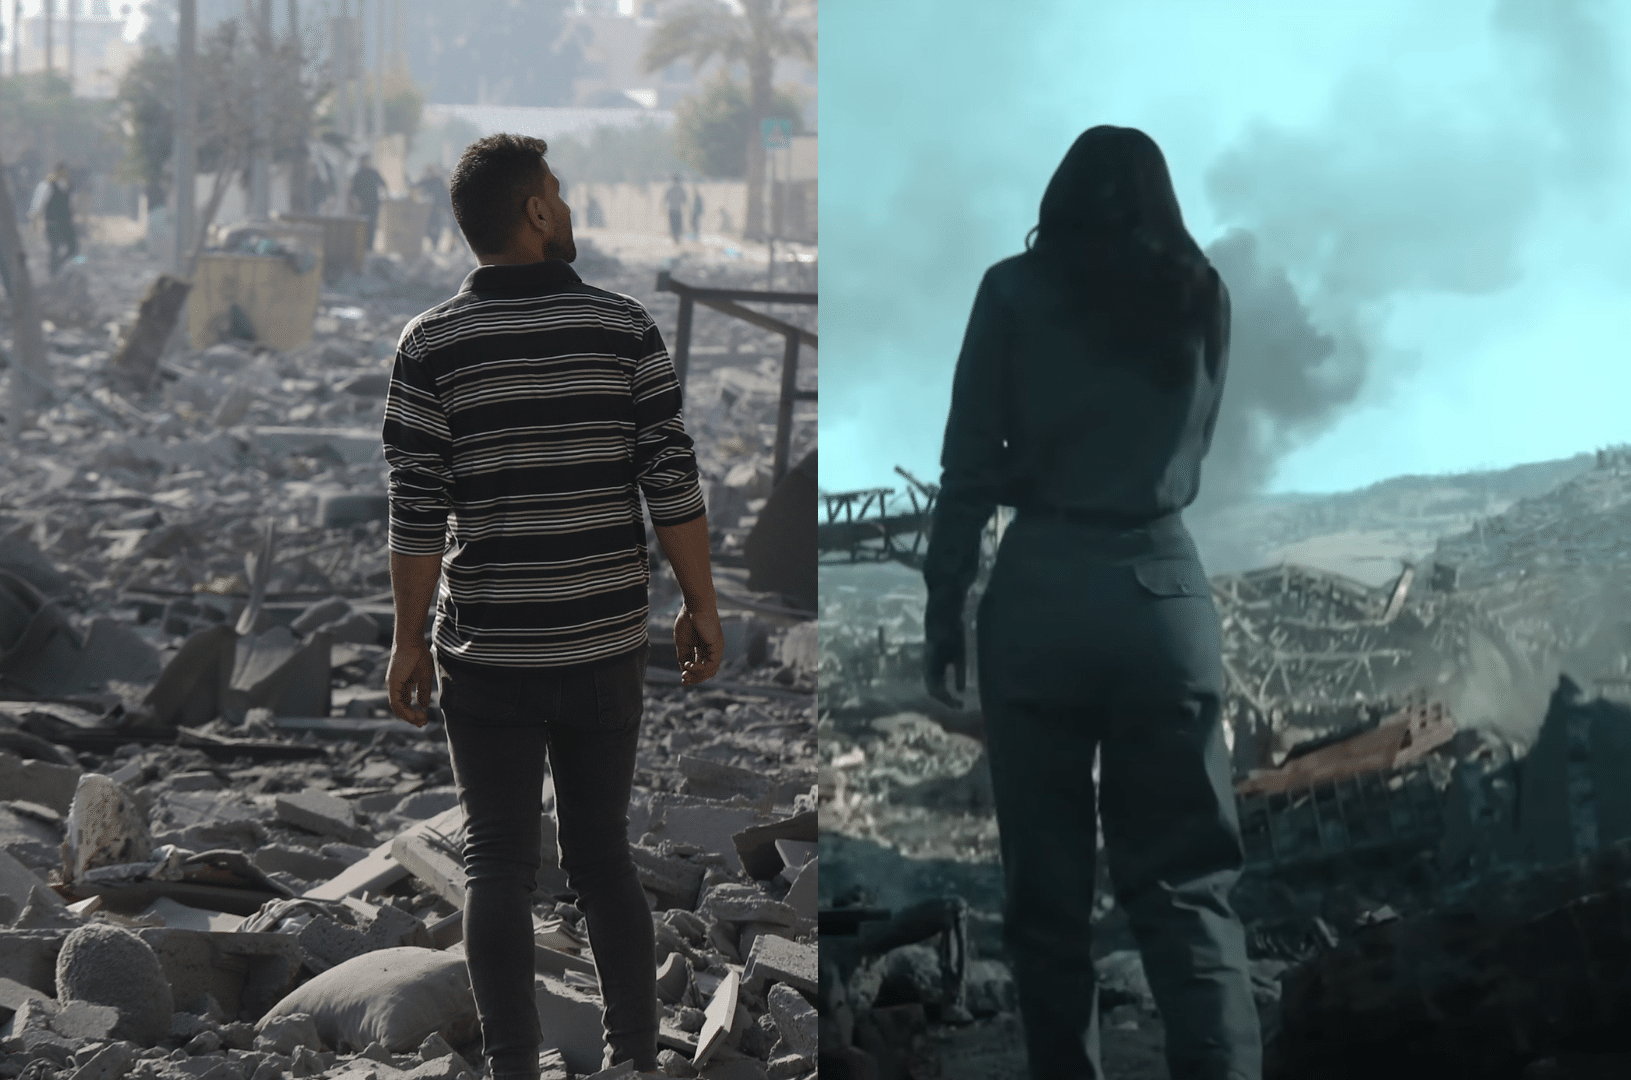 (left) Massive destruction caused by the bombing on a residential apartment in Hamad City, Qatar, in Khan Yunis, south of the Gaza Strip. Credit: Shutterstock/Mohammad Abu Elsebah (right) Jennifer Lawrence as Katniss Everdeen in Mockingjay Part 1. Credit: Lionsgate